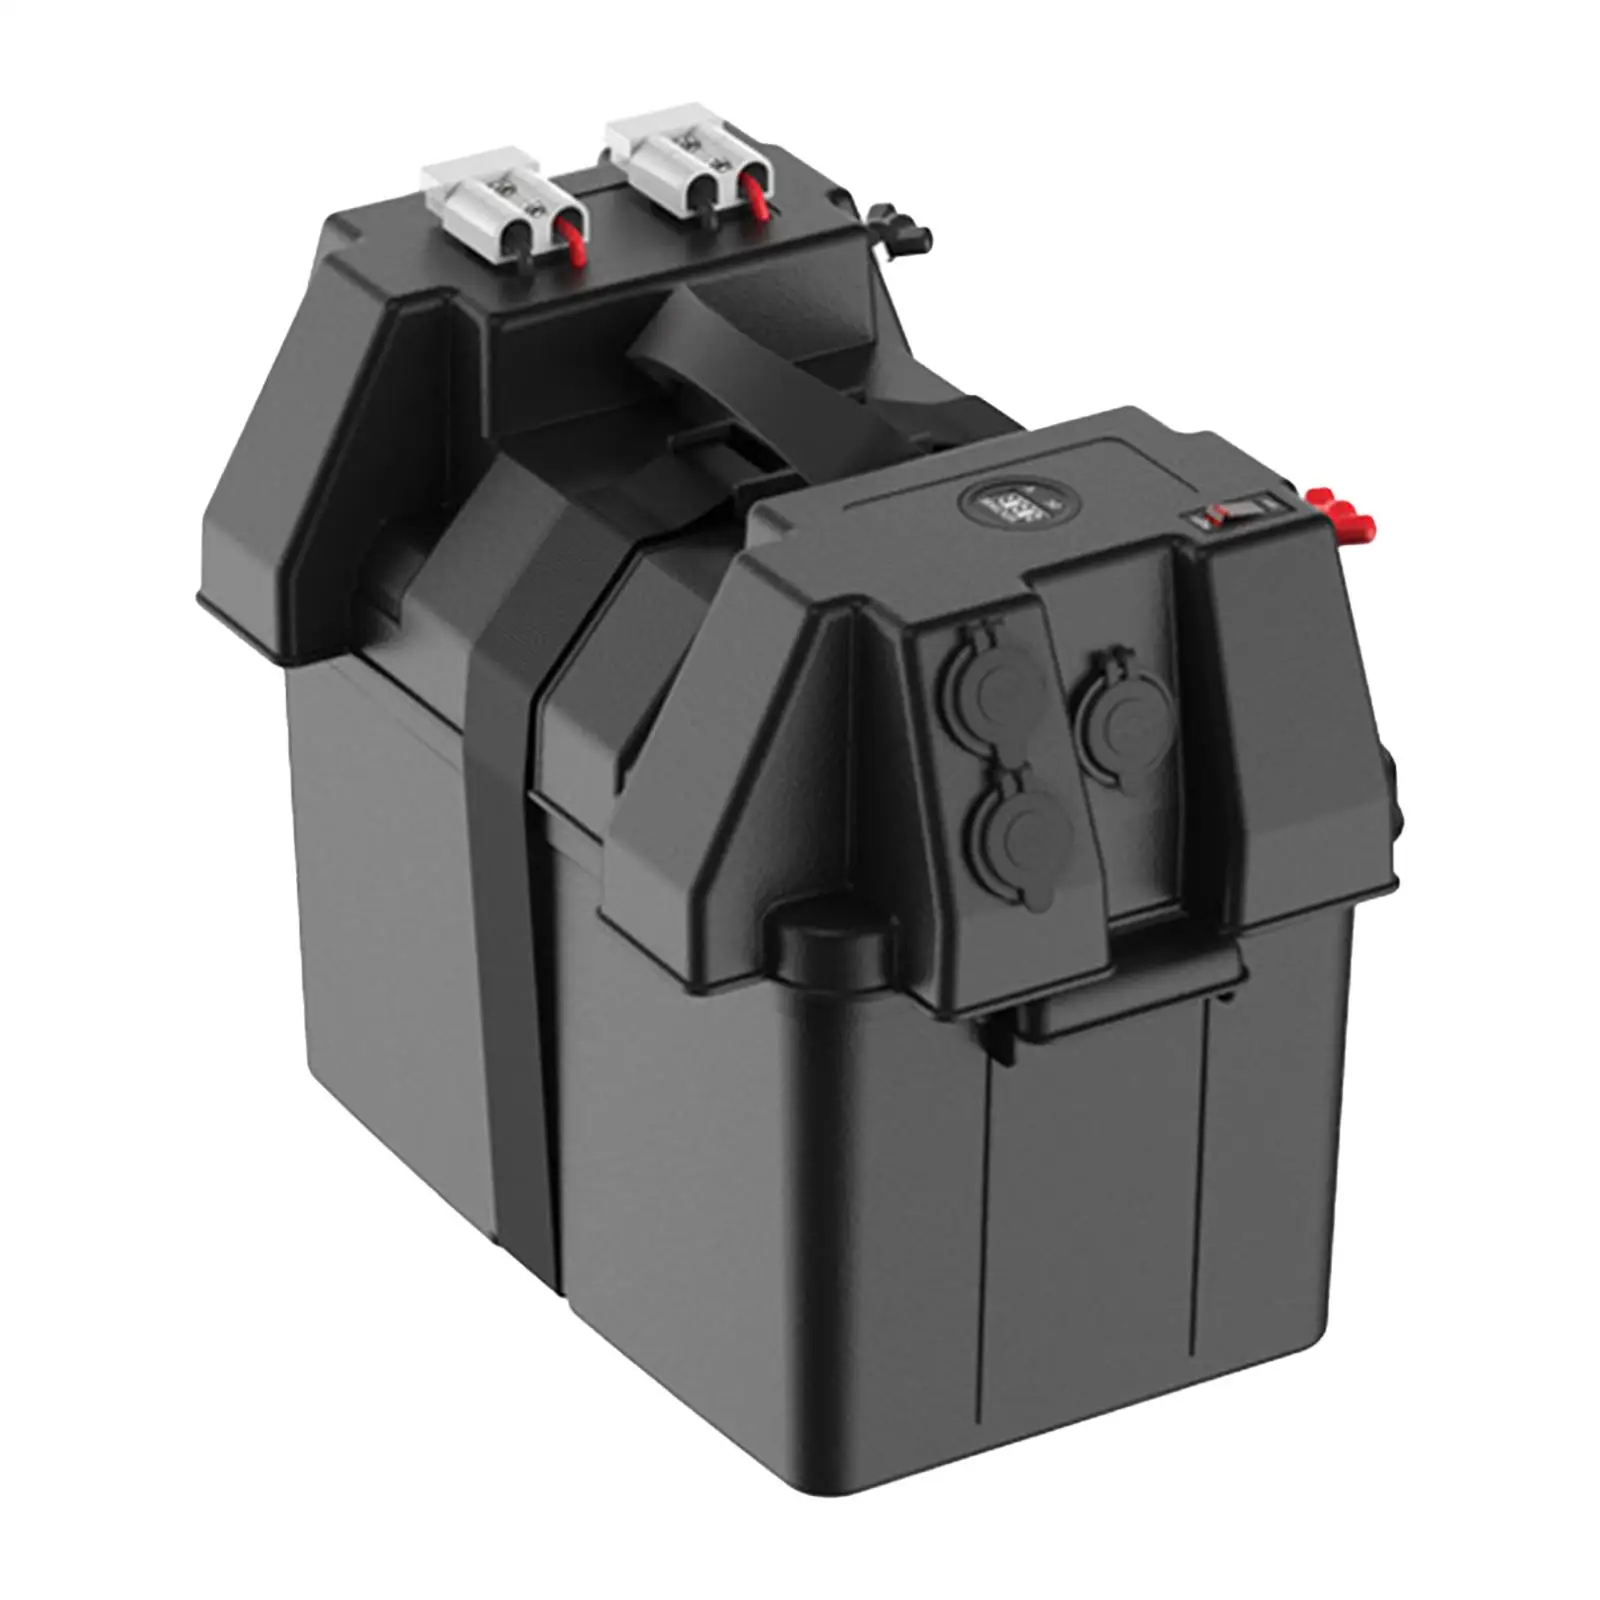 Trolling Motor Battery Box Multifunction USB Ports Waterproof Outdoor Battery Cases for Truck Outdoor Boat Trailer Camper